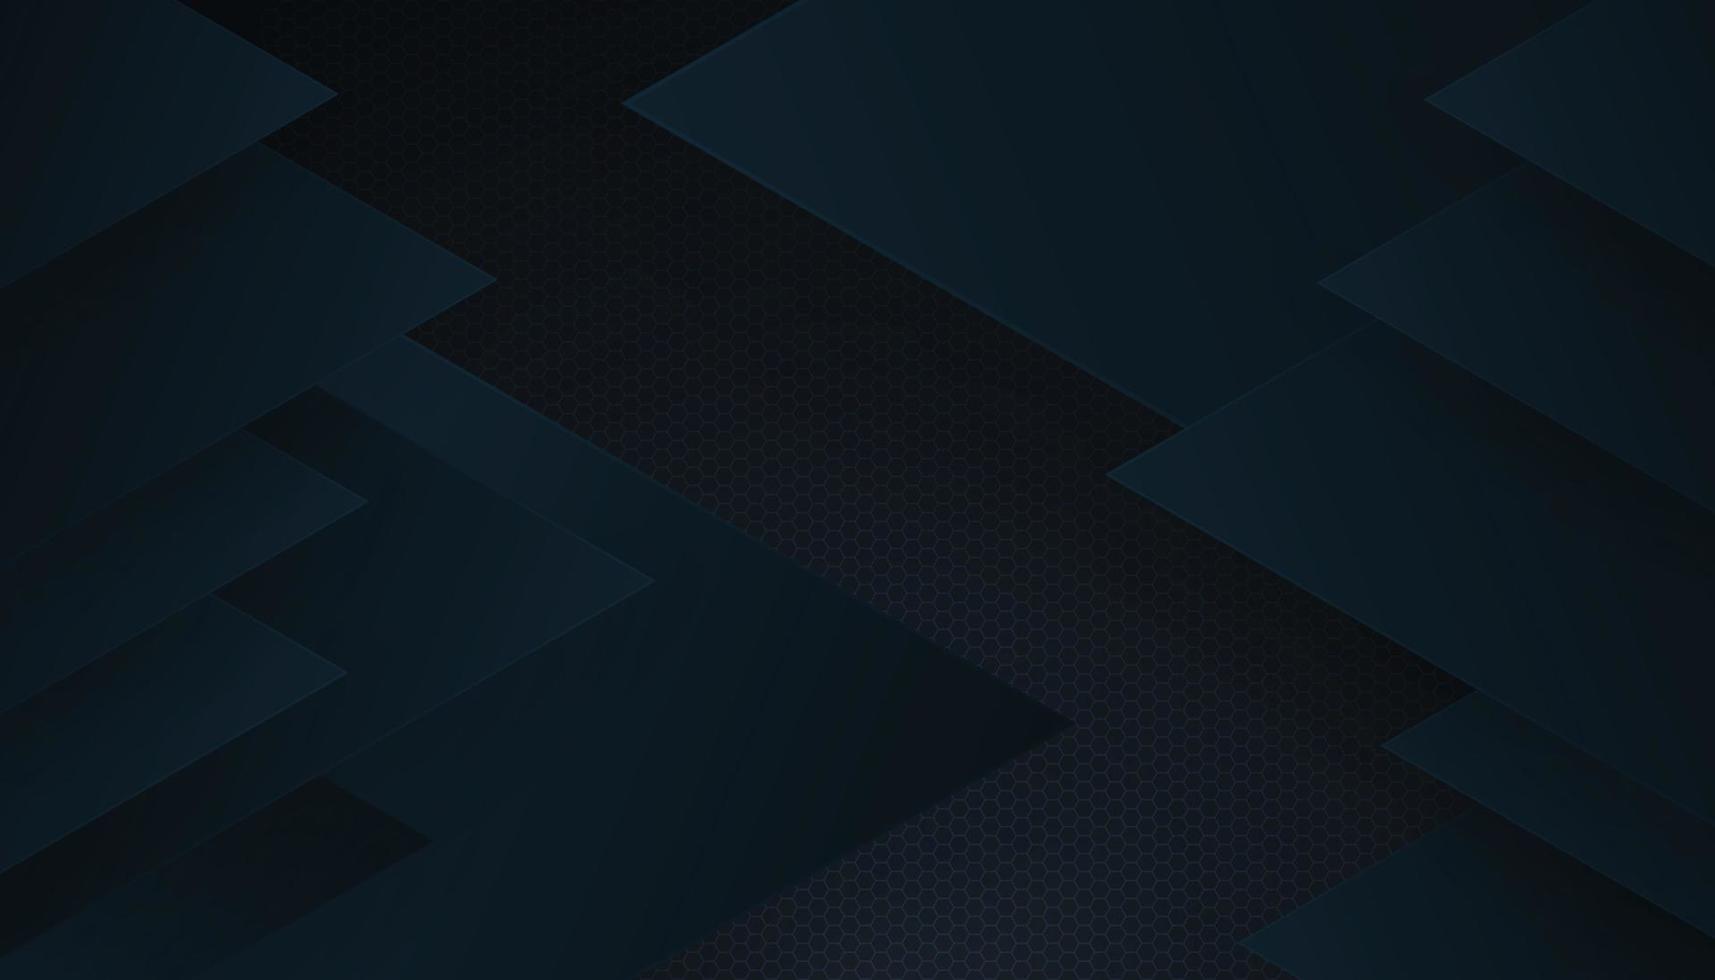 Abstract Hexagon Background with Dark Blue Overlap Shape. Vector ...